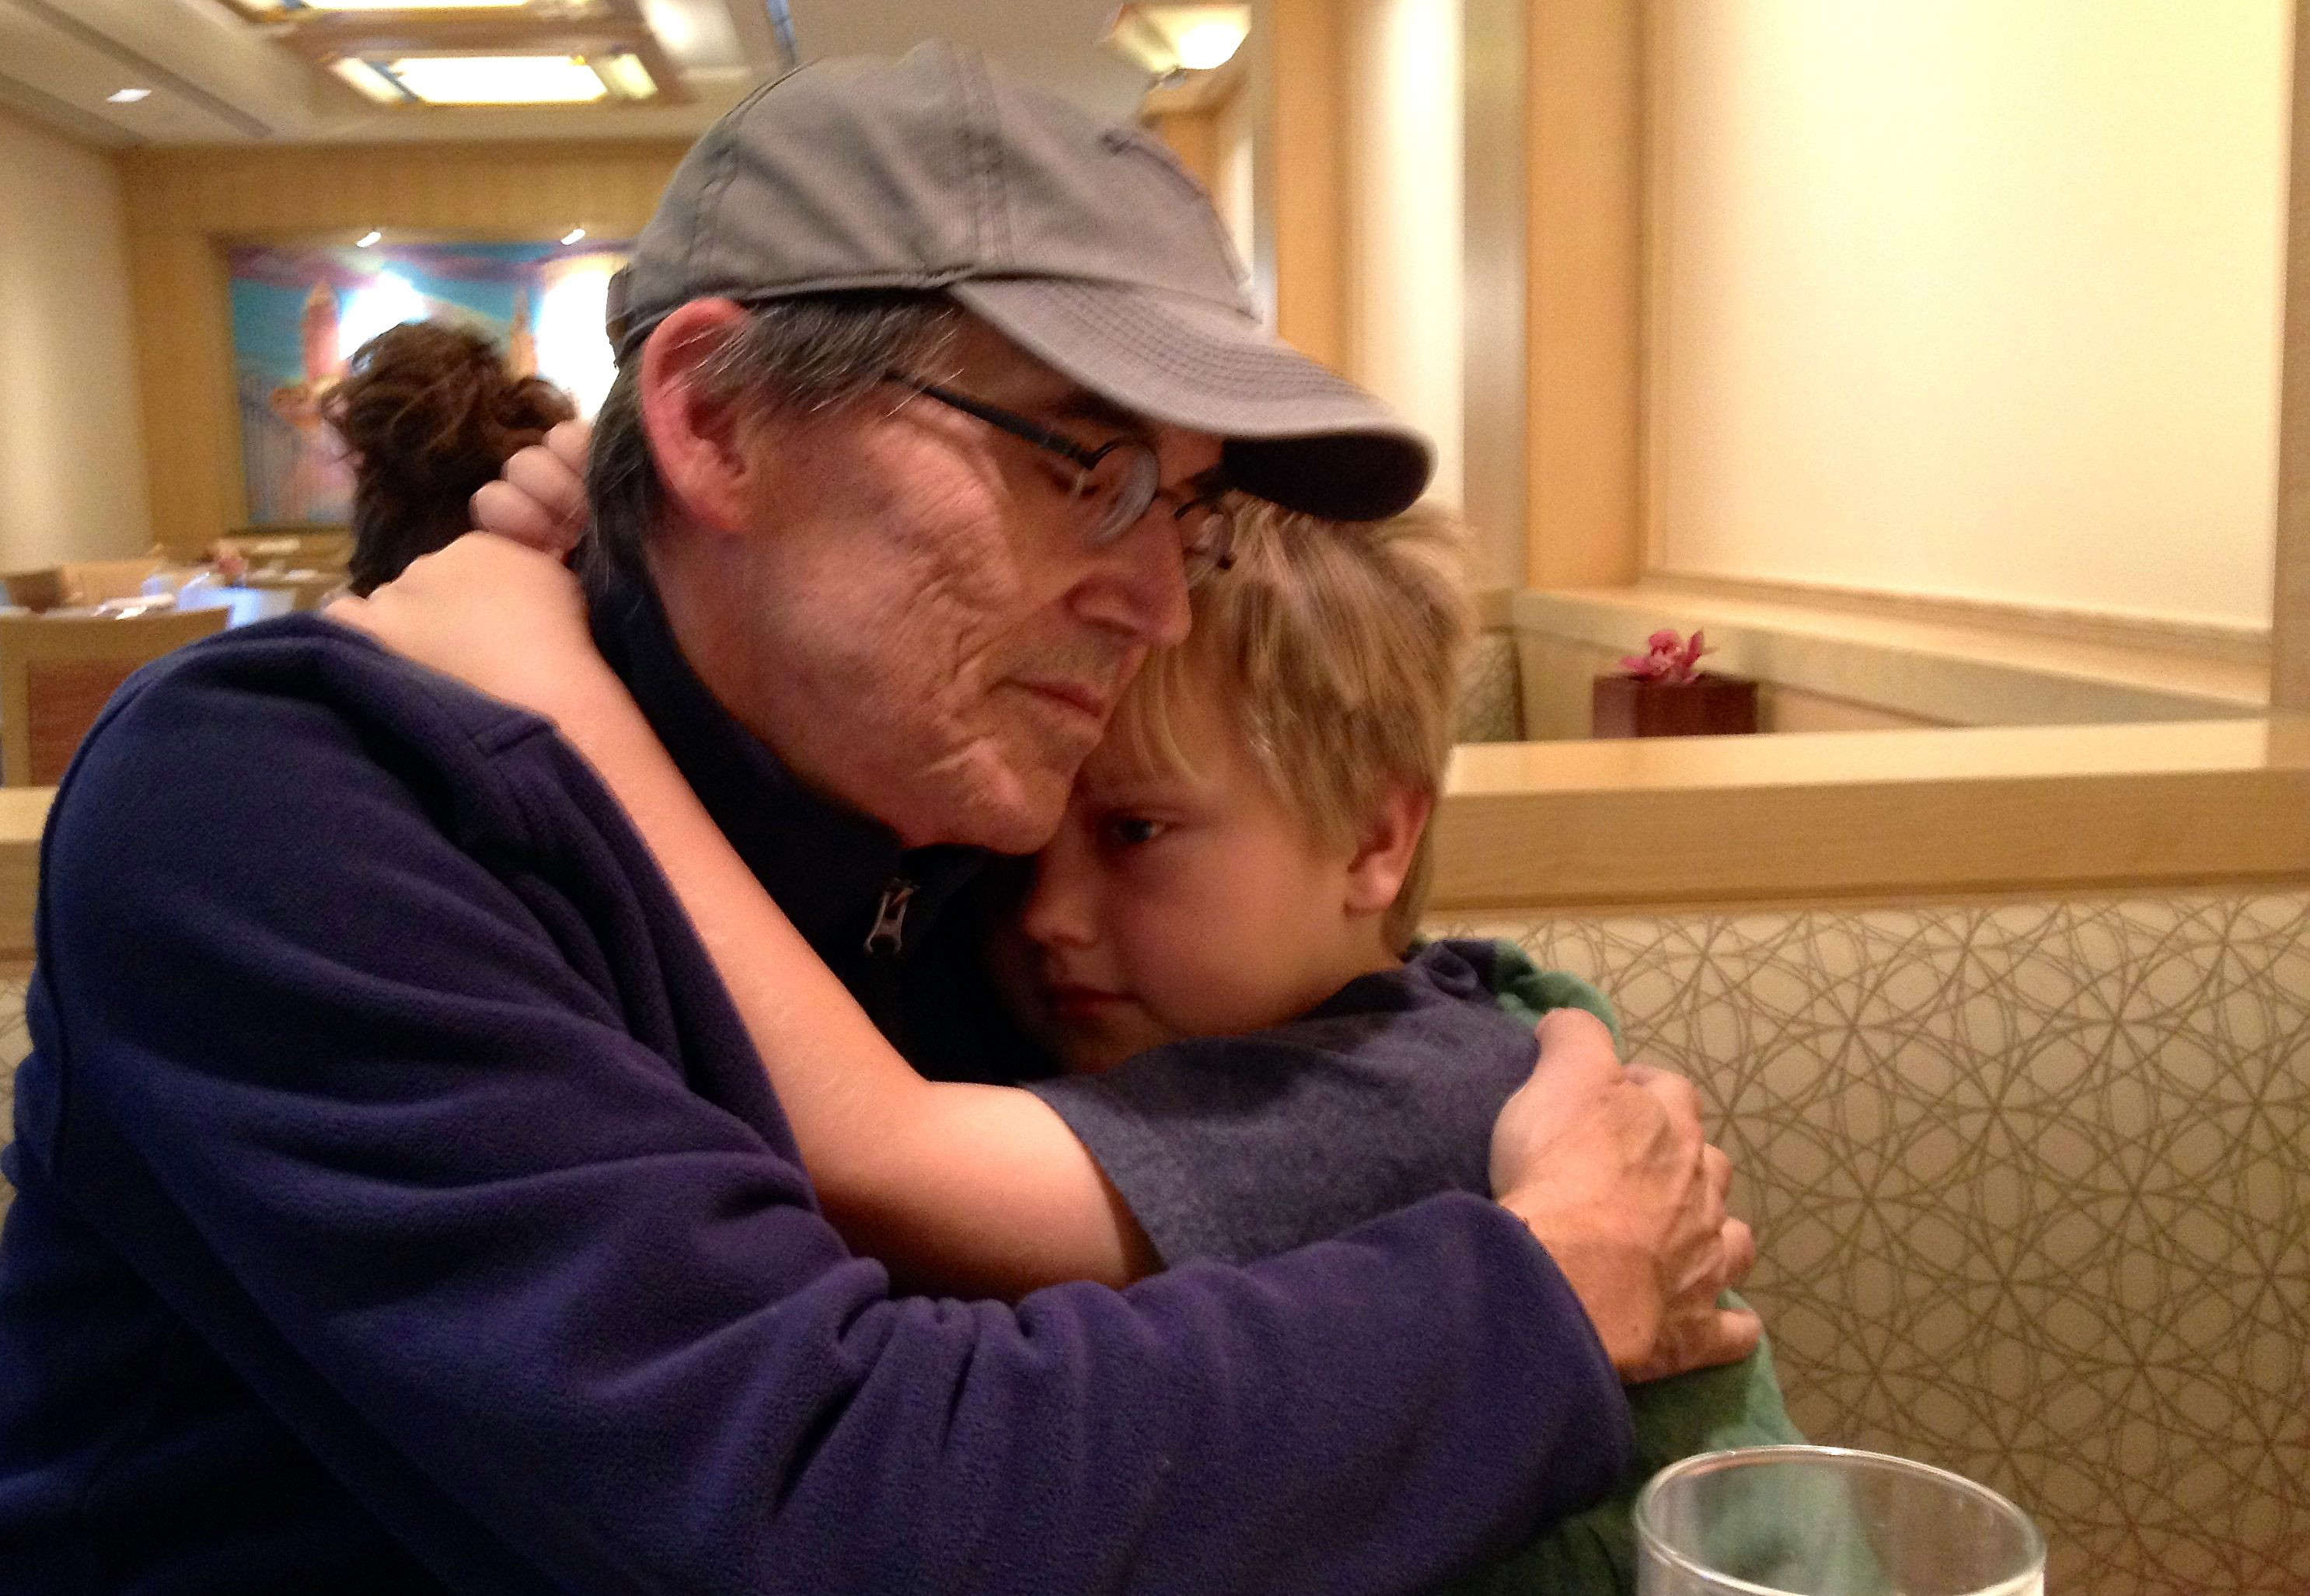 Joel Beeson and his youngest son, Joel, 7, at breakfast in the hotel before one of Mr. Beeson's procedures at the Cleveland Clinic, October, 2013. (Courtesy of Joel Beeson)